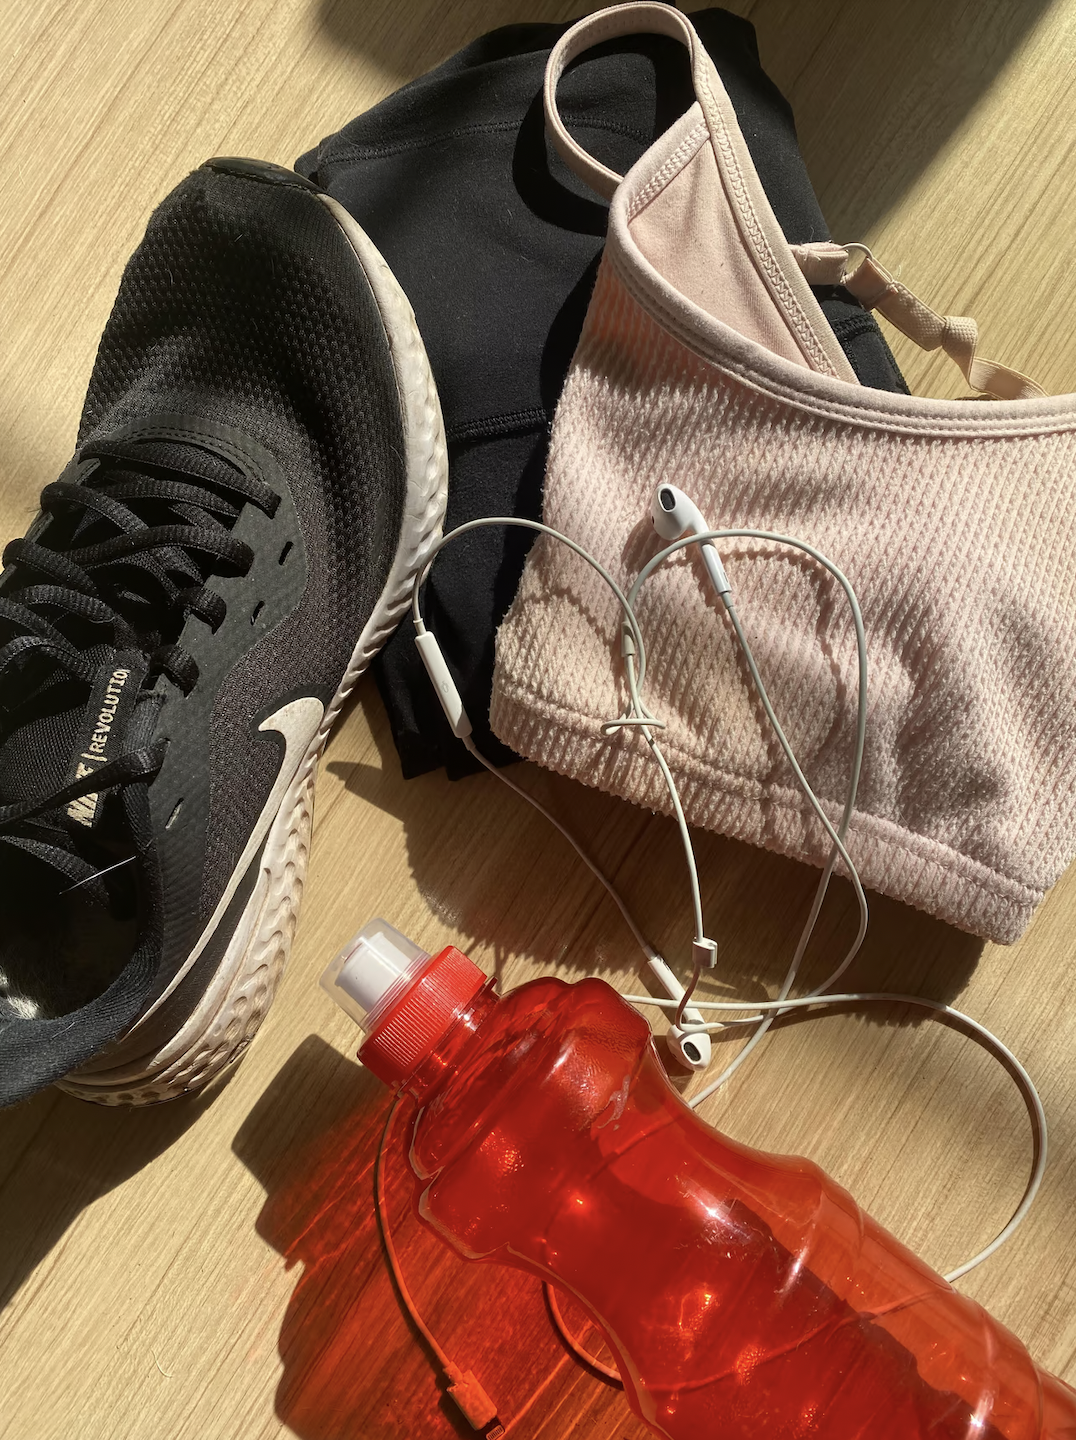 A photo of neatly folded exercise clothes including leggings, a sports bra, and sneakers, symbolising preparation for a 37-week nutrition and fitness weight loss program.